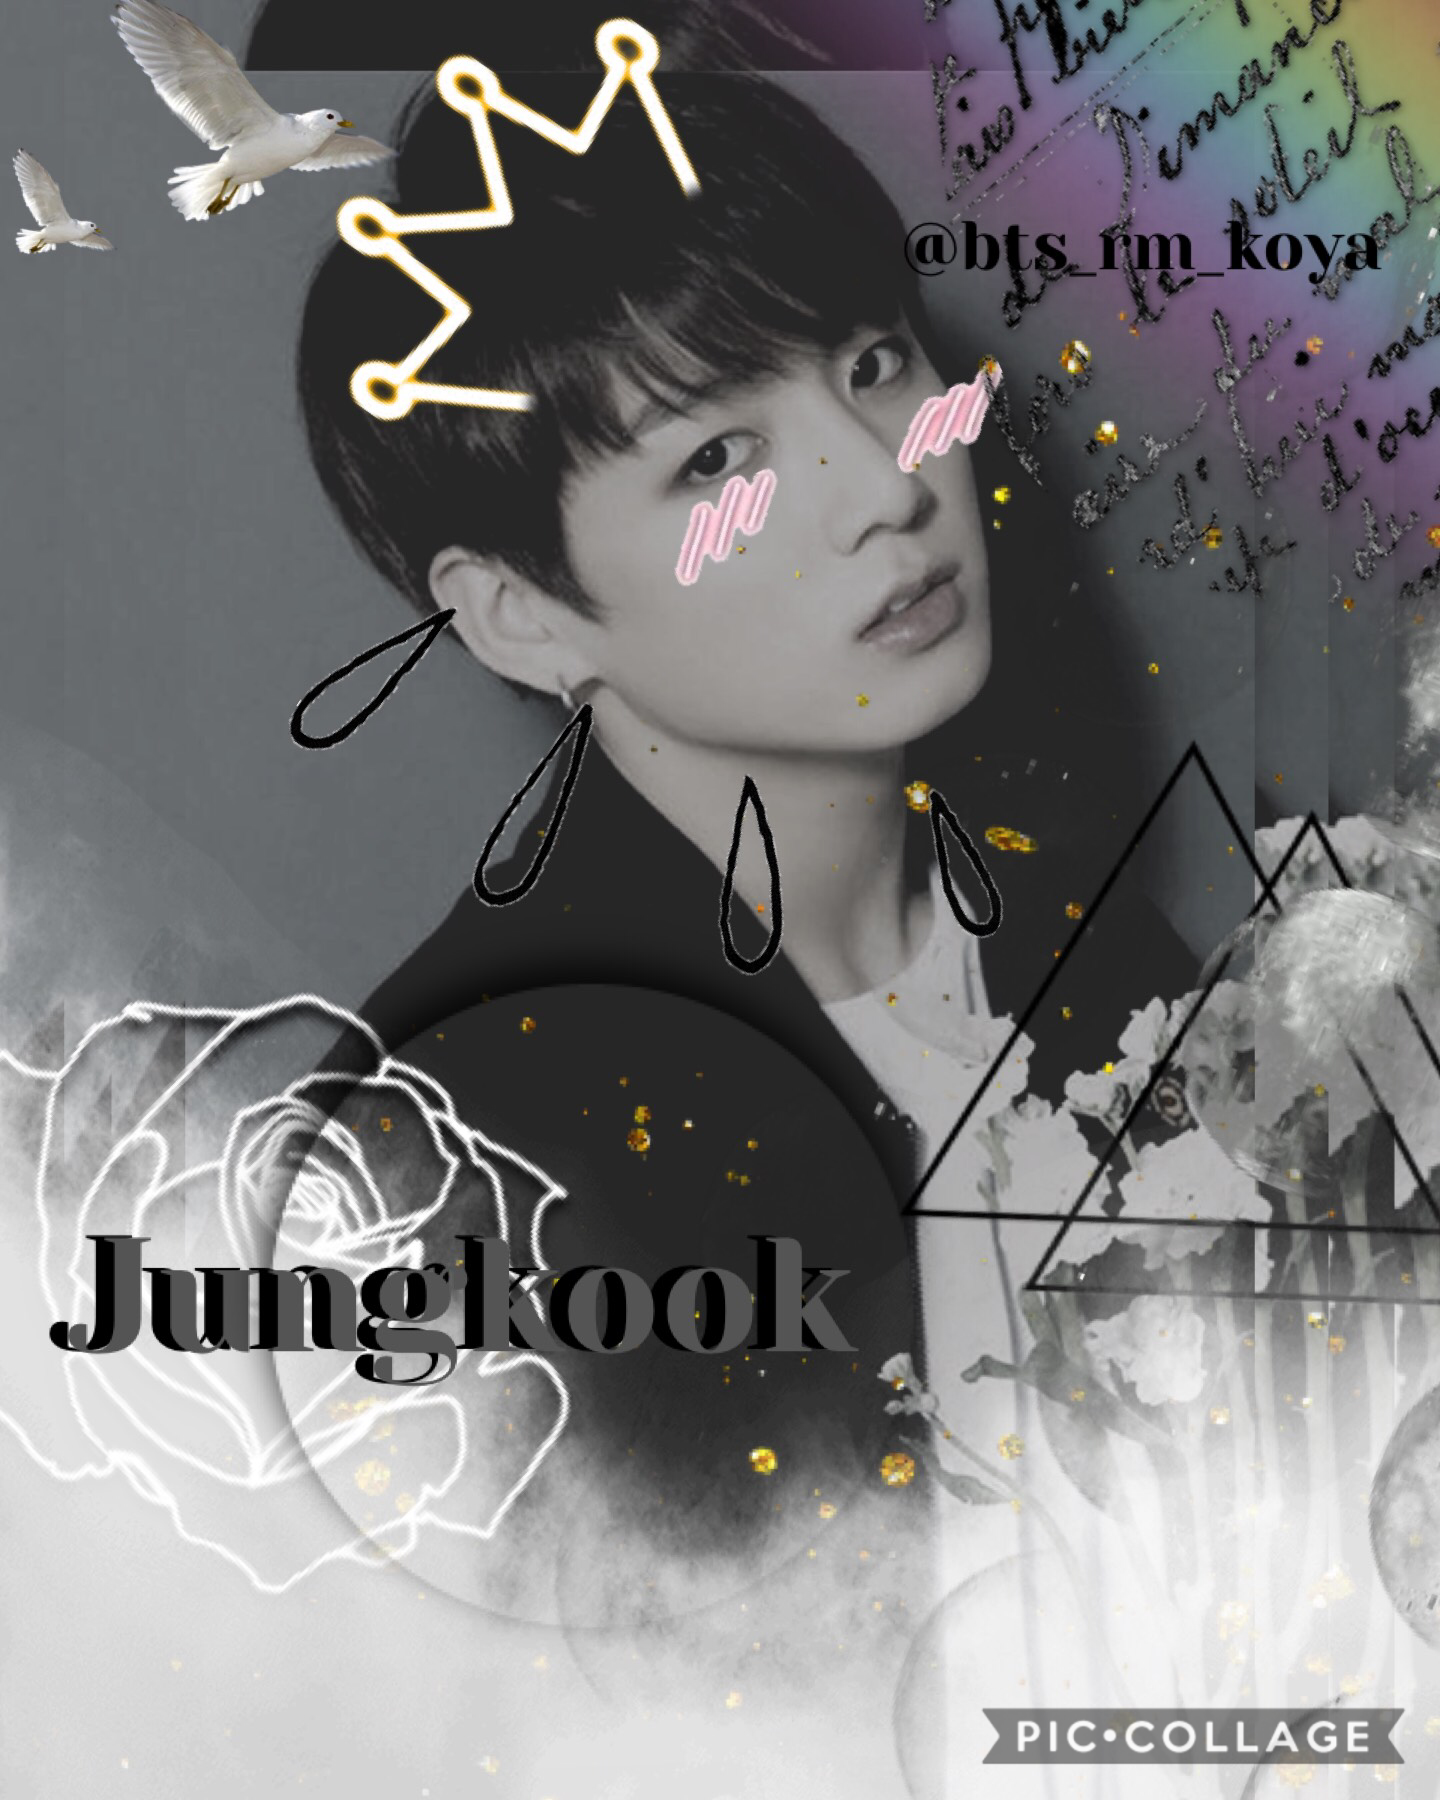 Jungkook (sorry it didn’t come out right)